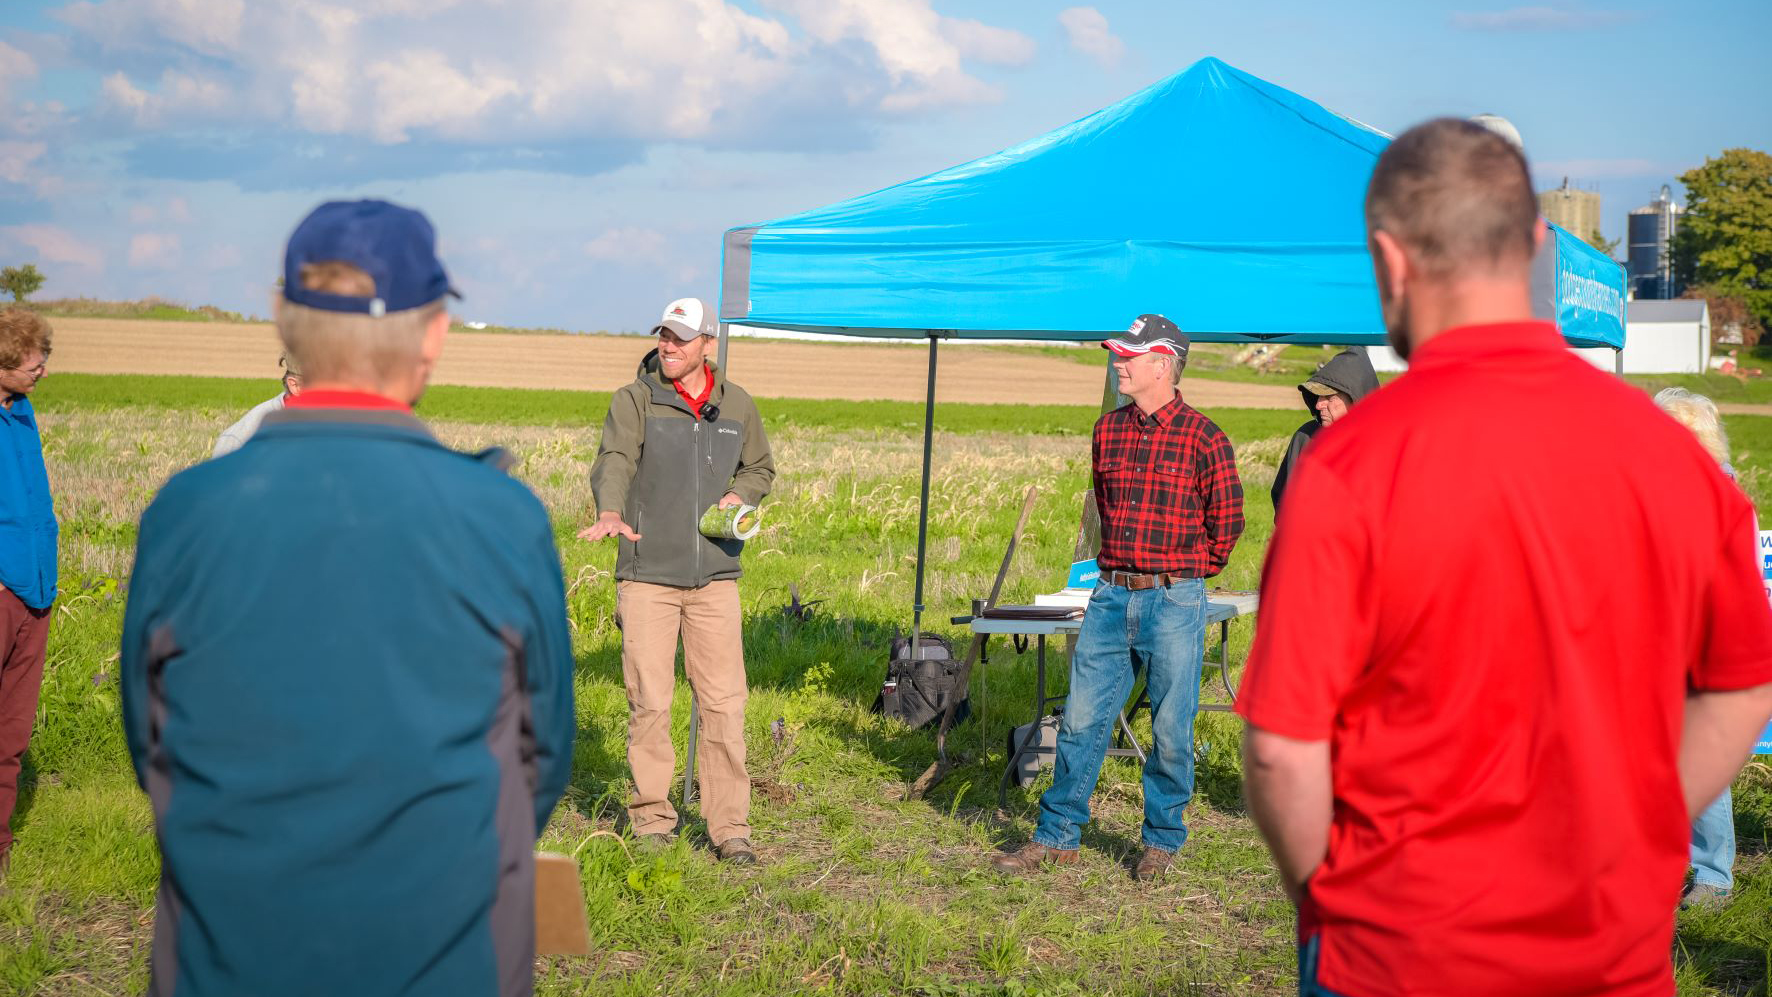 Cover crop showcase brings farmers and lake property owners together for a unique event